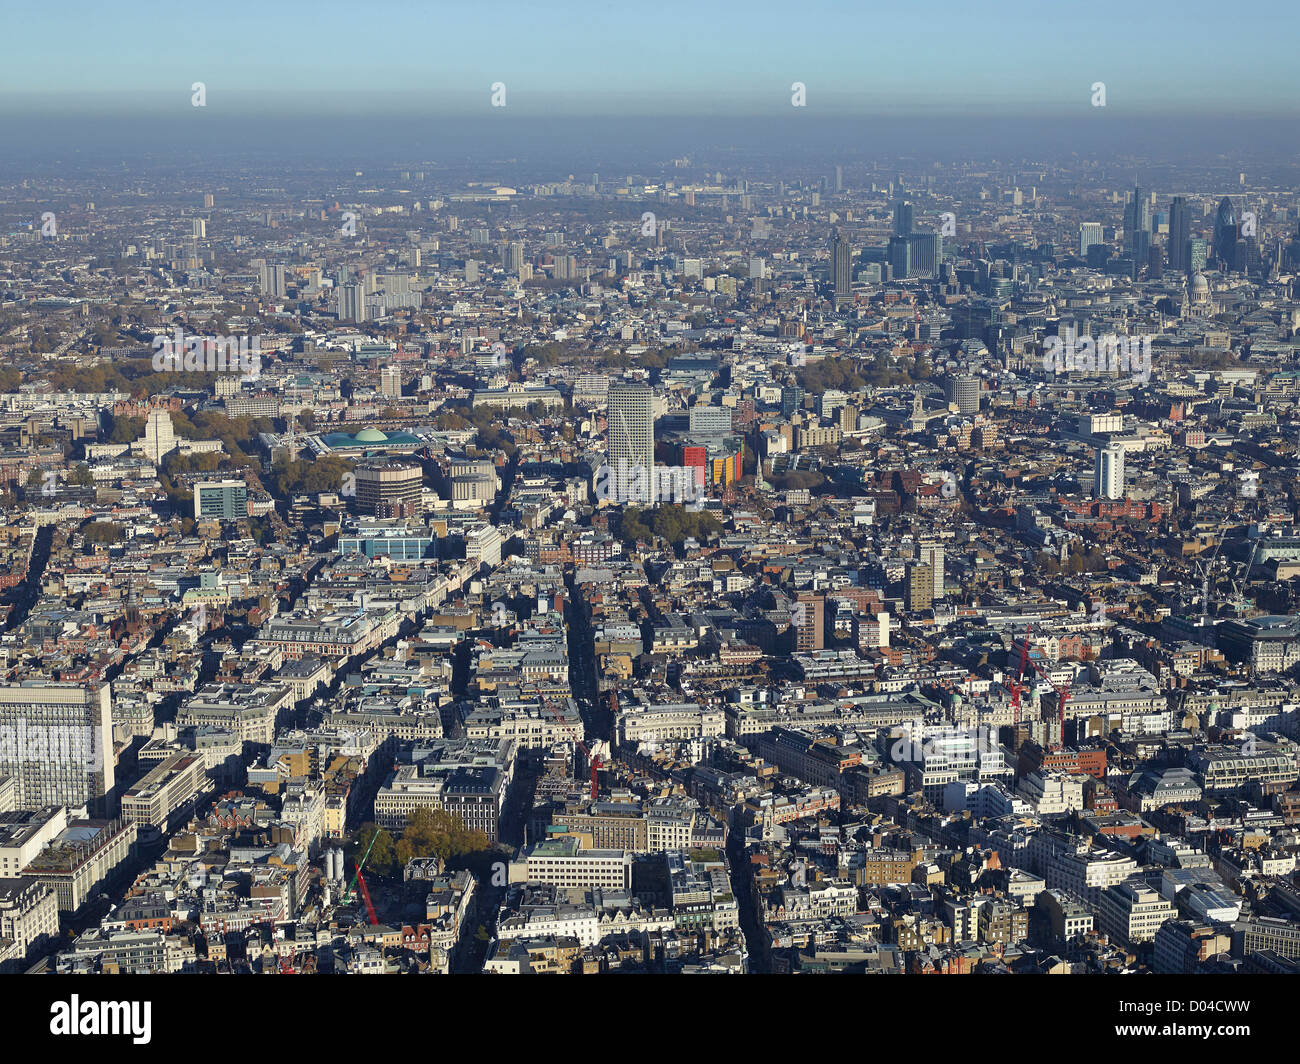 London's West End and Mayfair from the air, Oxford Street on the left and the City in the distance Stock Photo